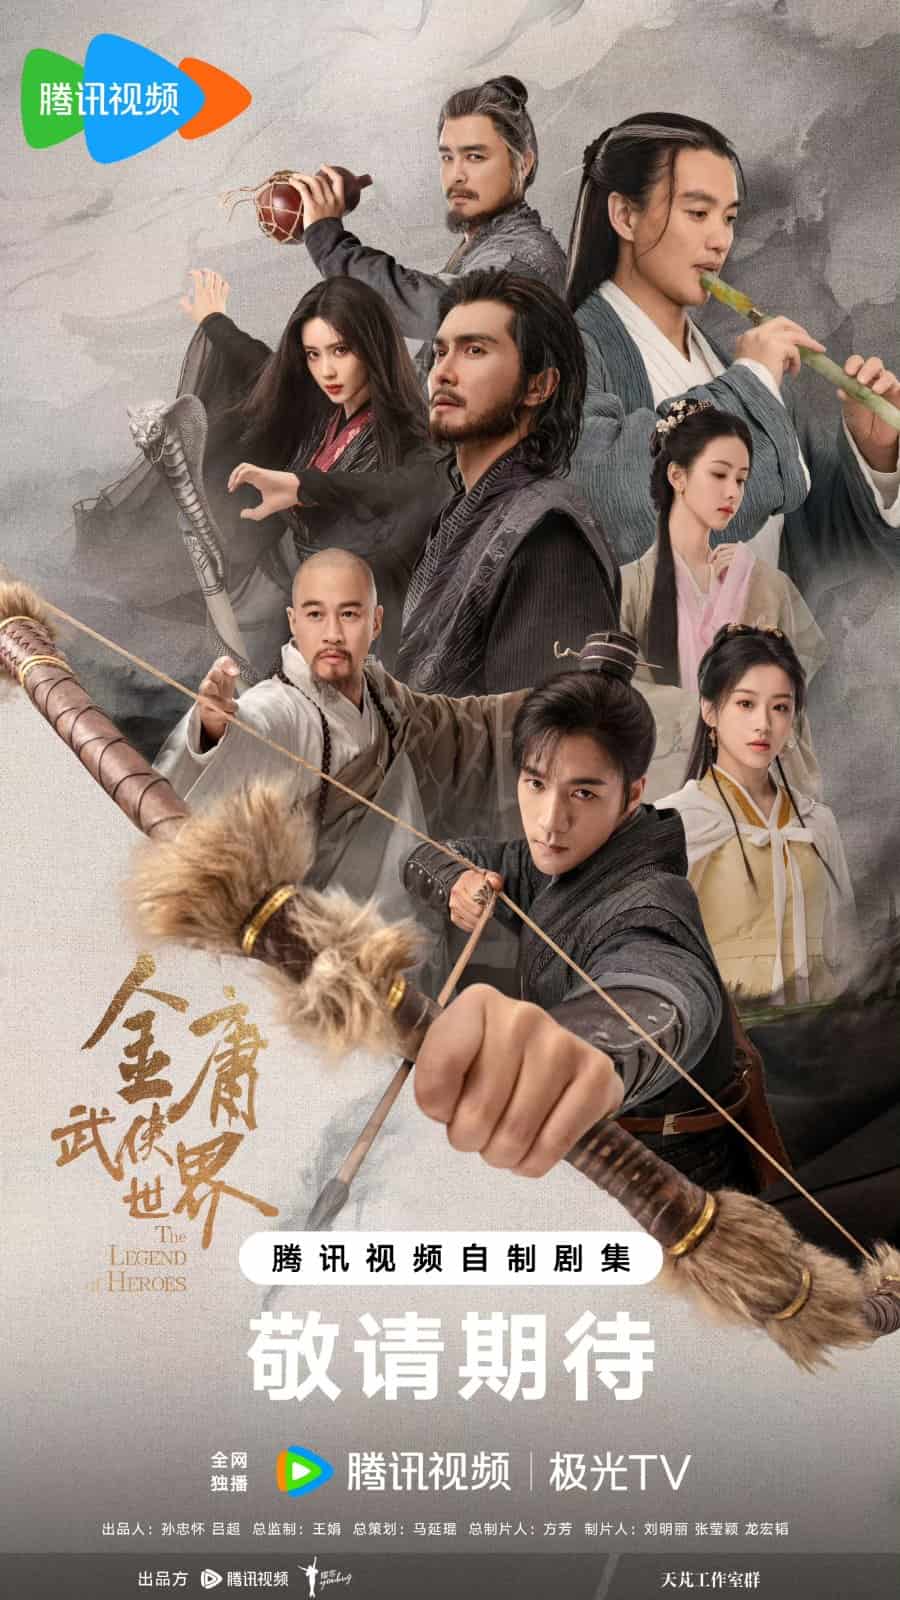 The Legend Of Heroes - Sinopsis, Pemain, OST, Episode, Review